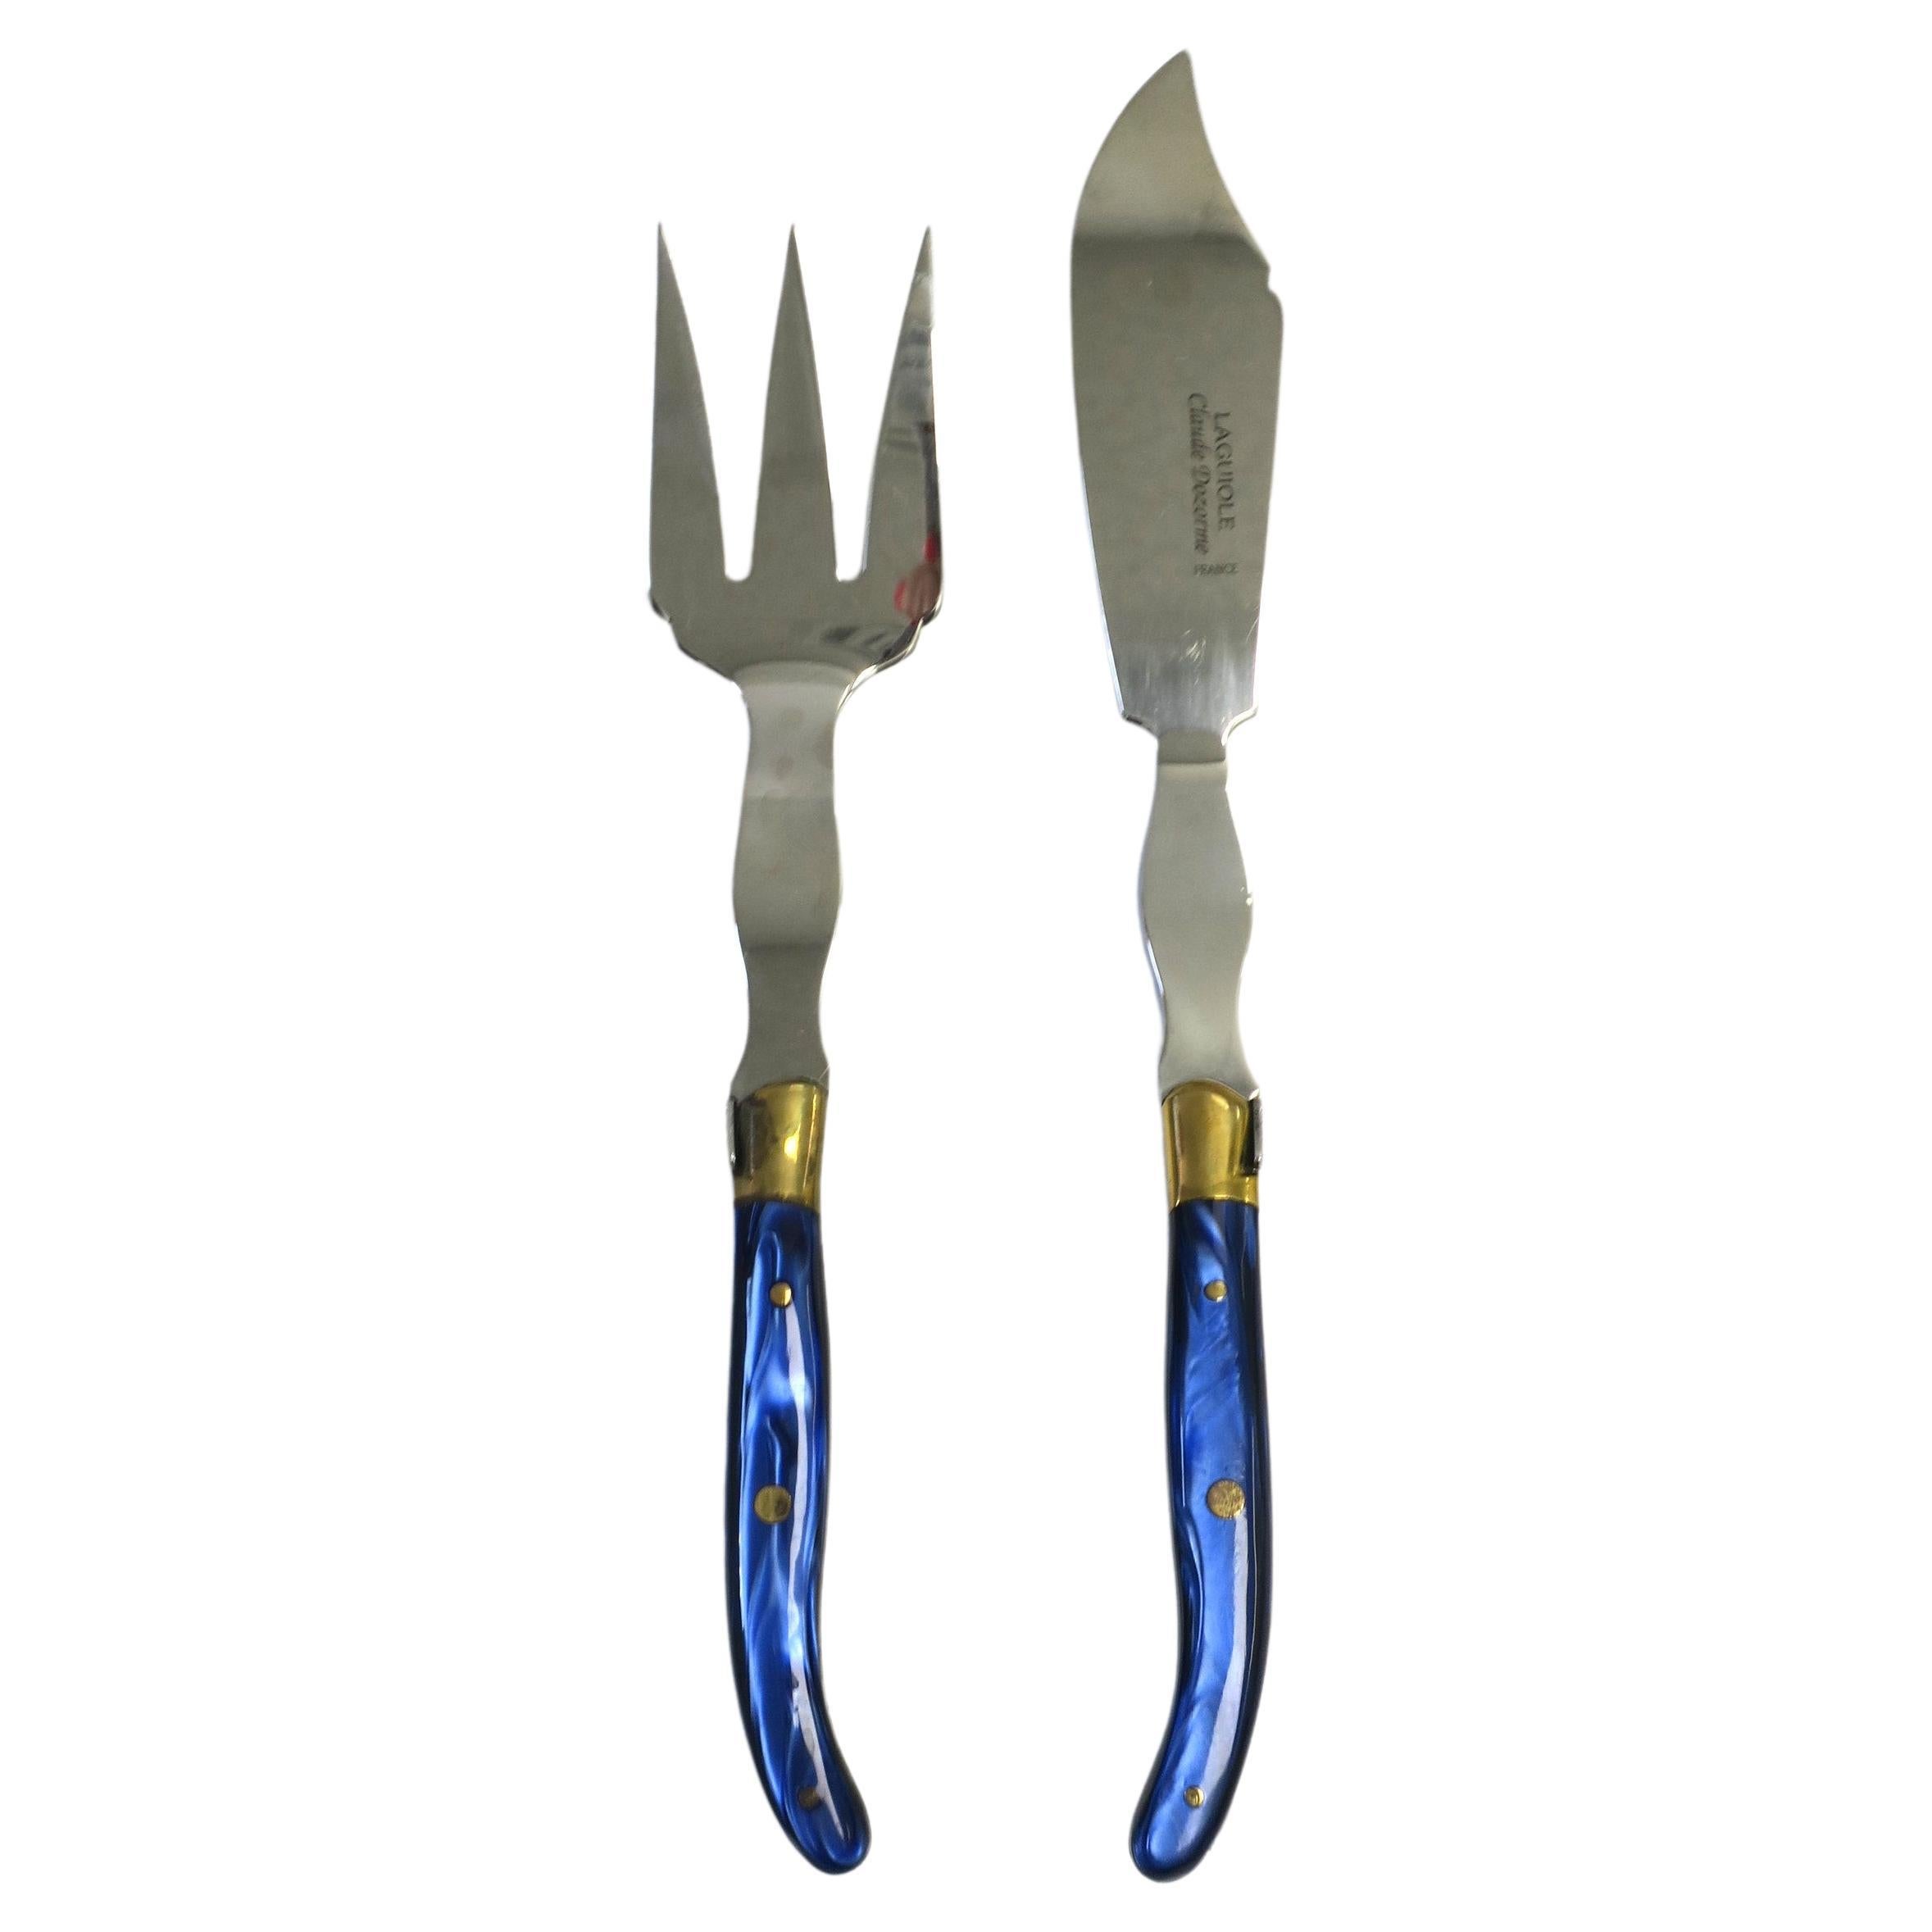 French Fish Poisson Fork and Knife Cutlery Service, Set of 2